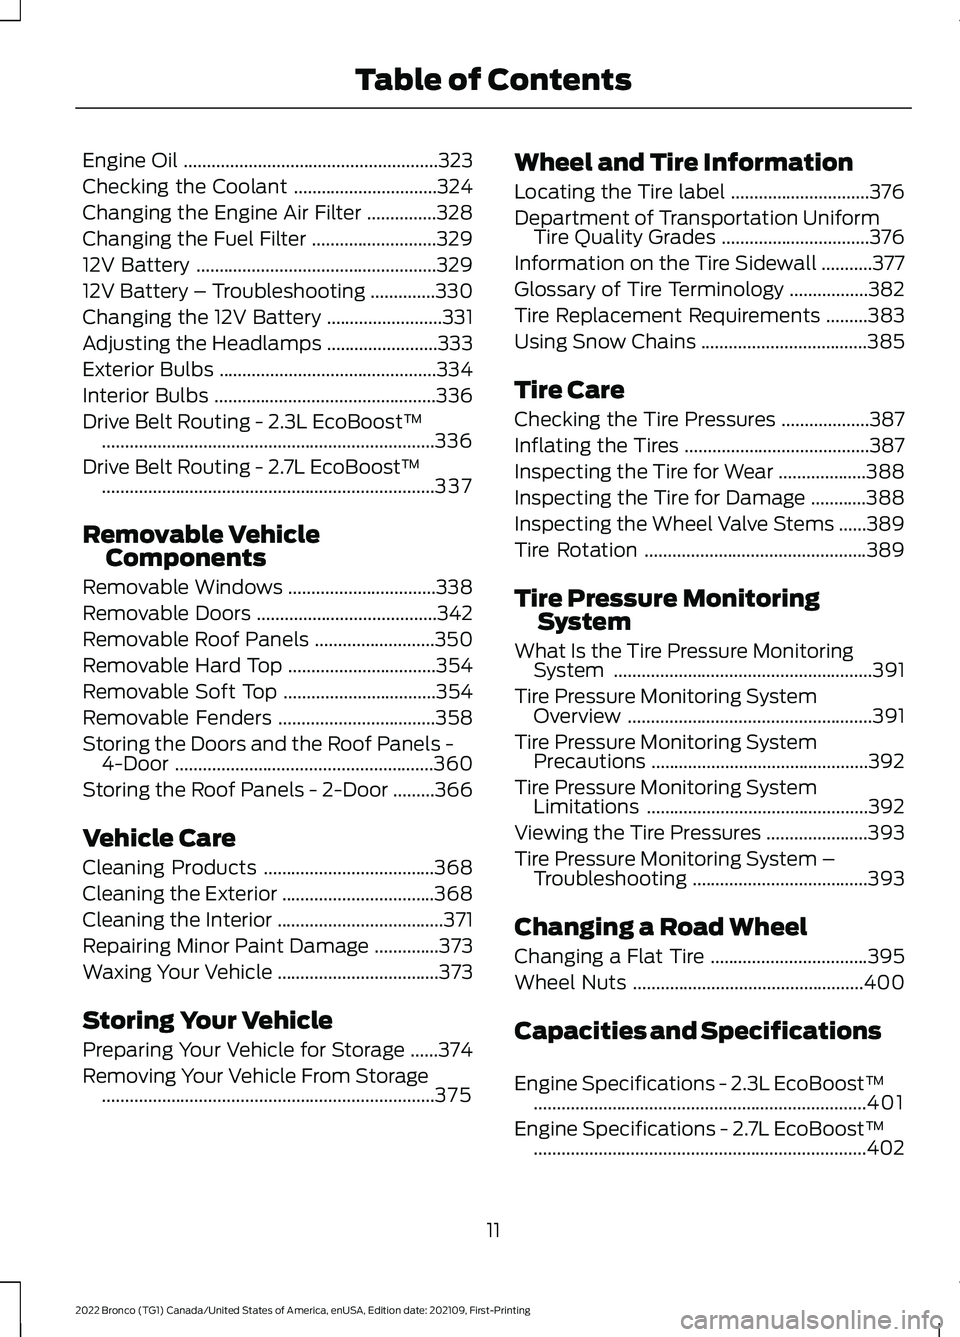 FORD BRONCO 2022 User Guide Engine Oil.......................................................323
Checking the Coolant...............................324
Changing the Engine Air Filter...............328
Changing the Fuel Filter...